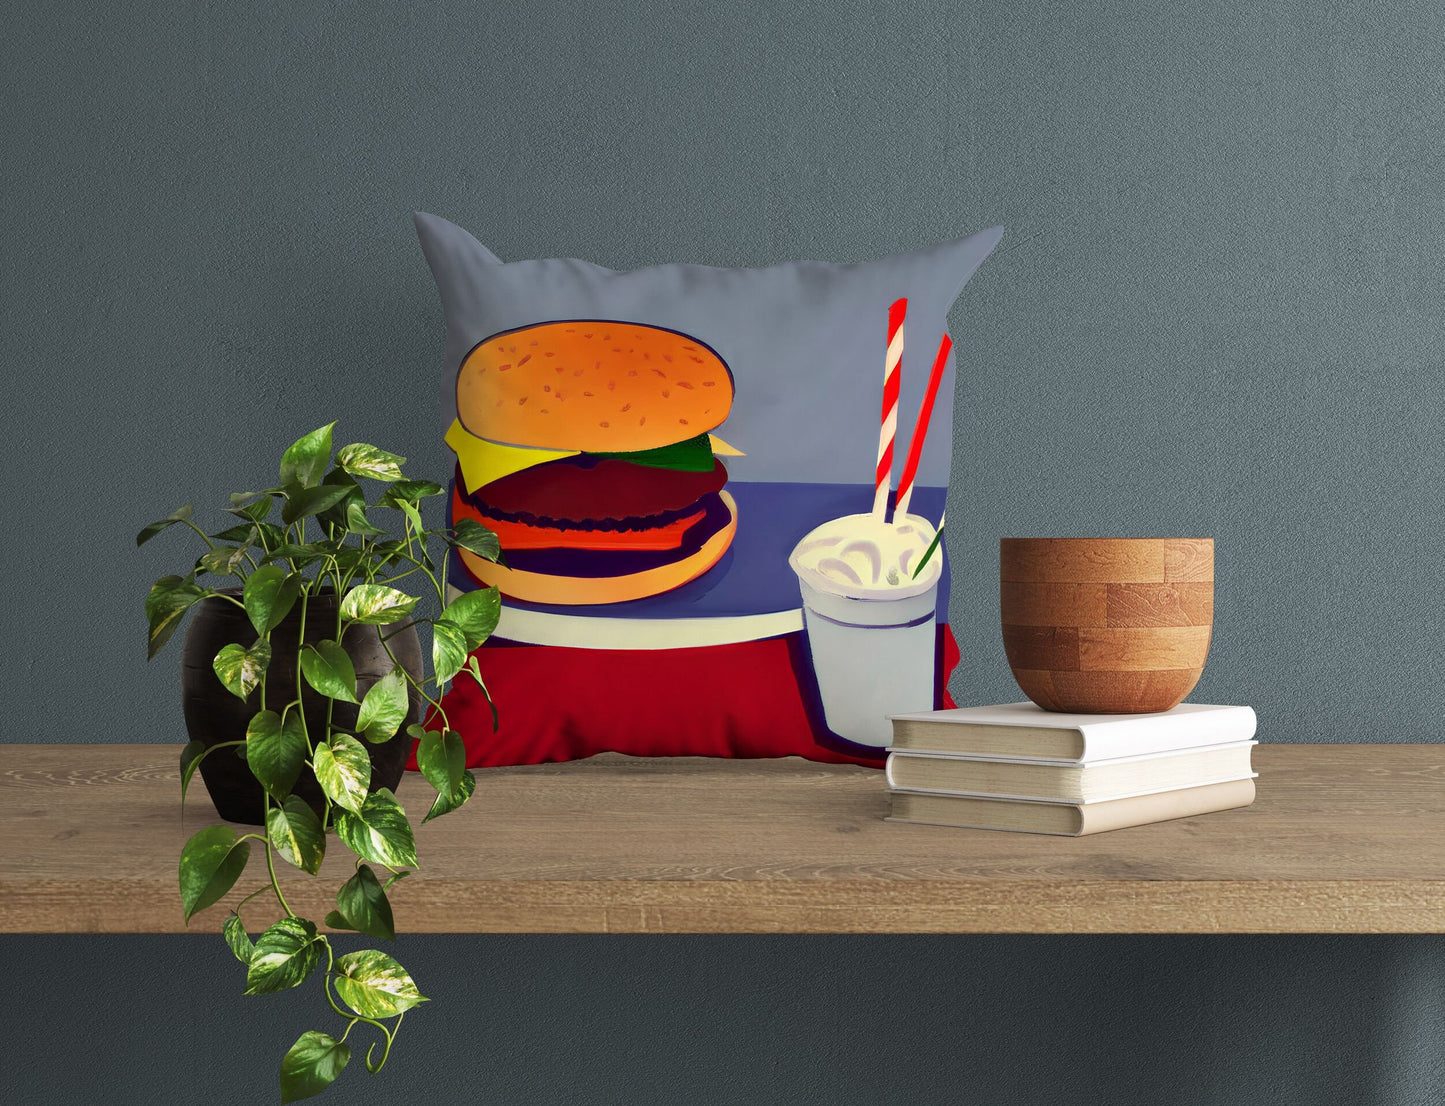 Hamburger And Drink, Pillow Case, Abstract Art Pillow, Designer Pillow, Colorful Pillow Case, Fashion, Playroom Decor, Pillow Cases Kids